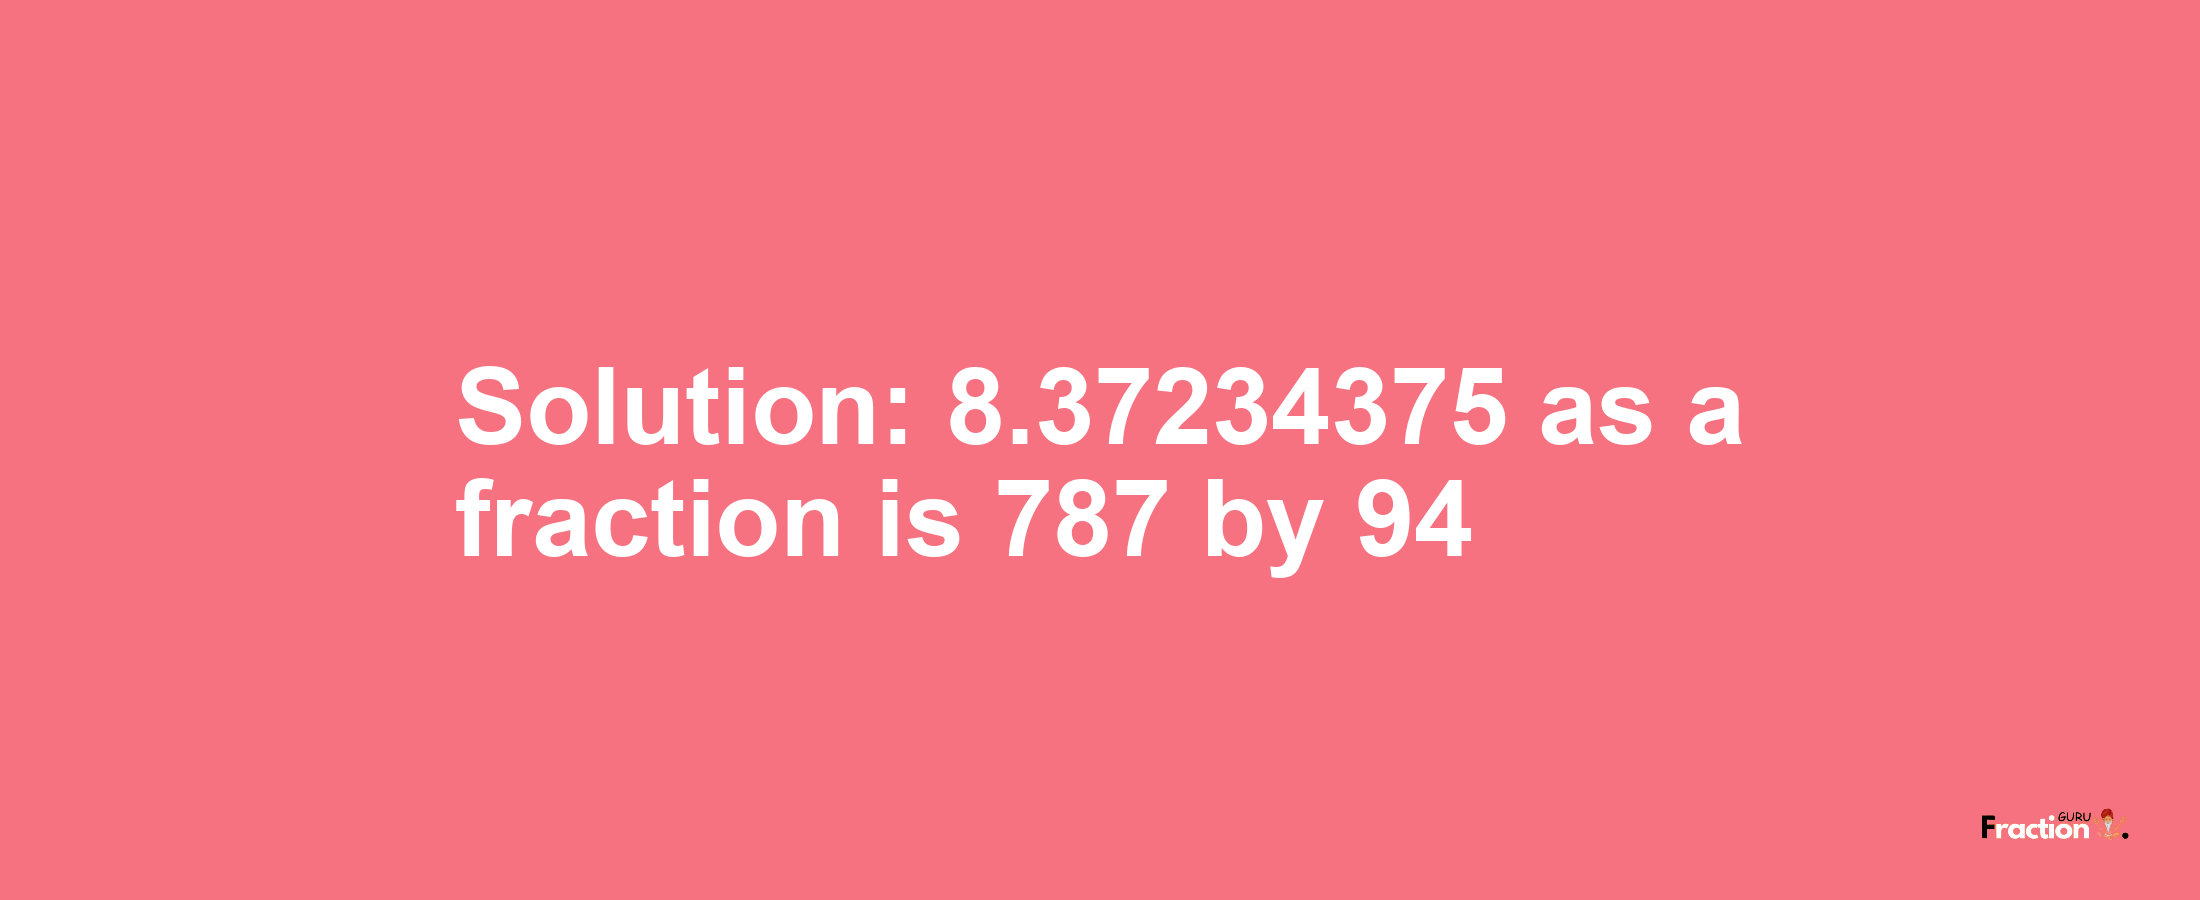 Solution:8.37234375 as a fraction is 787/94